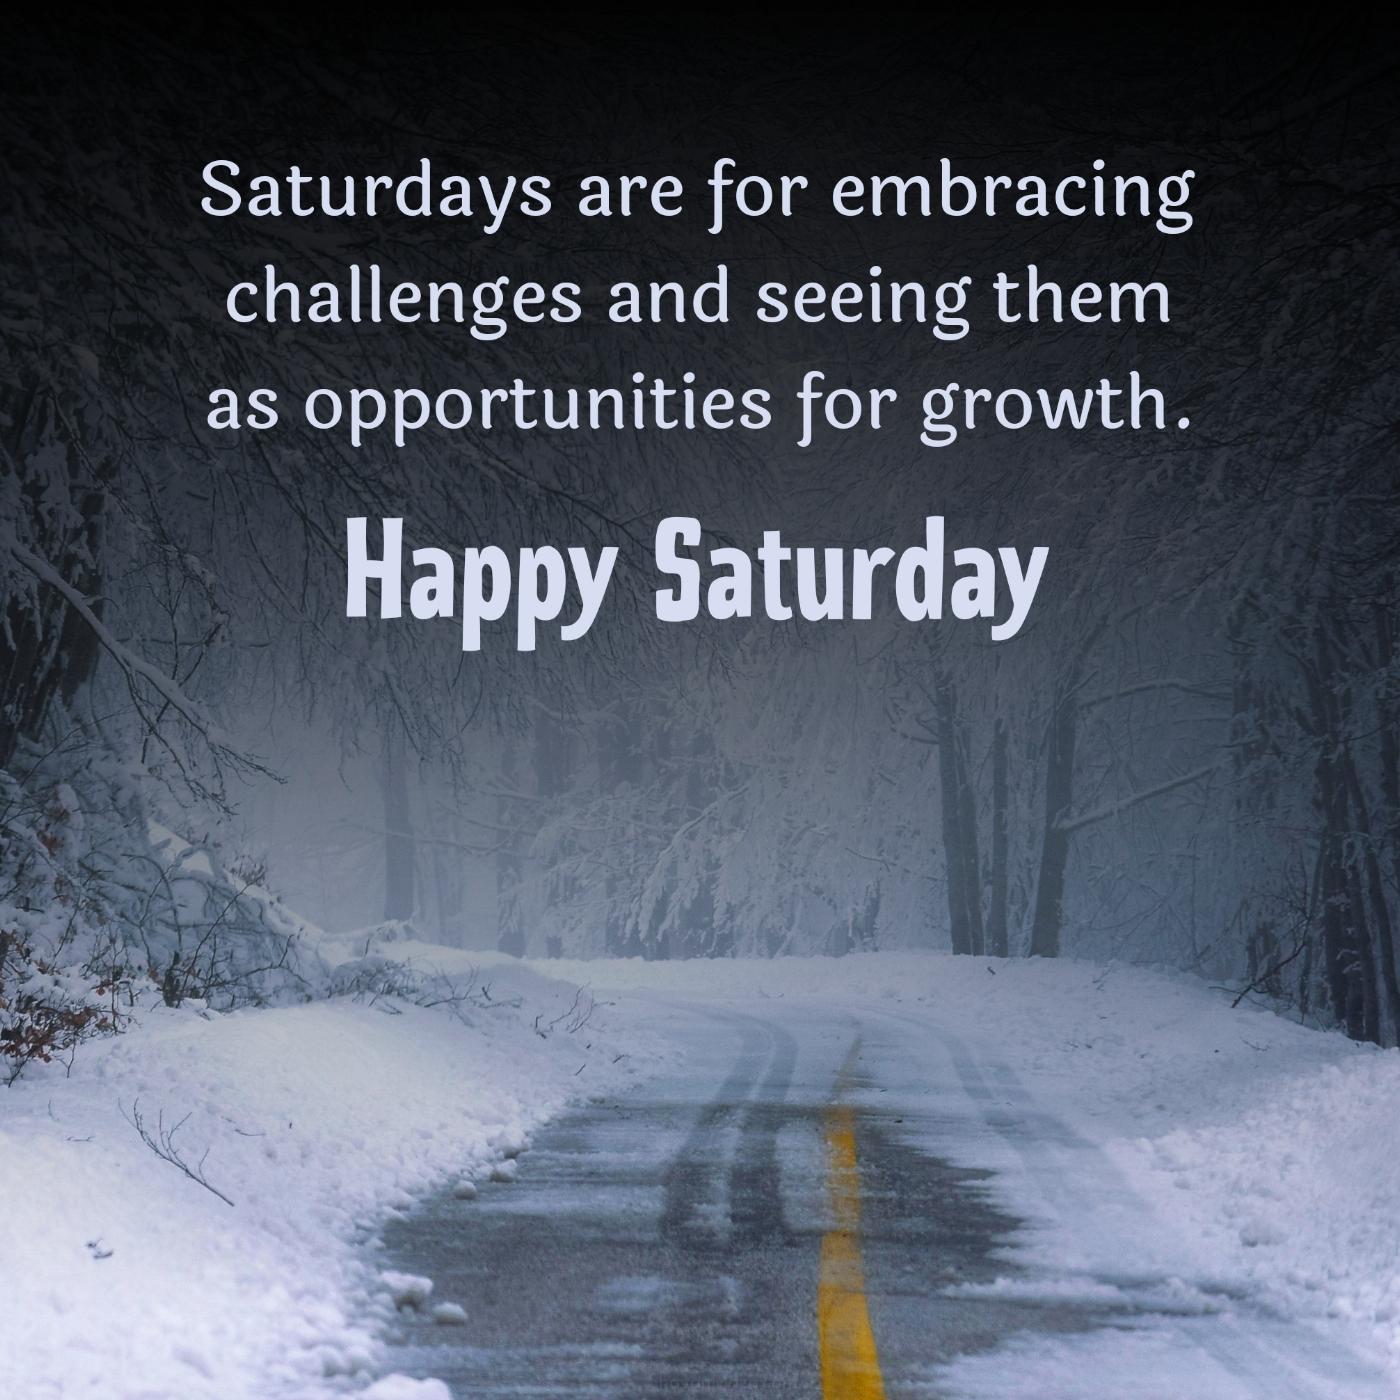 Saturdays are for embracing challenges and seeing them